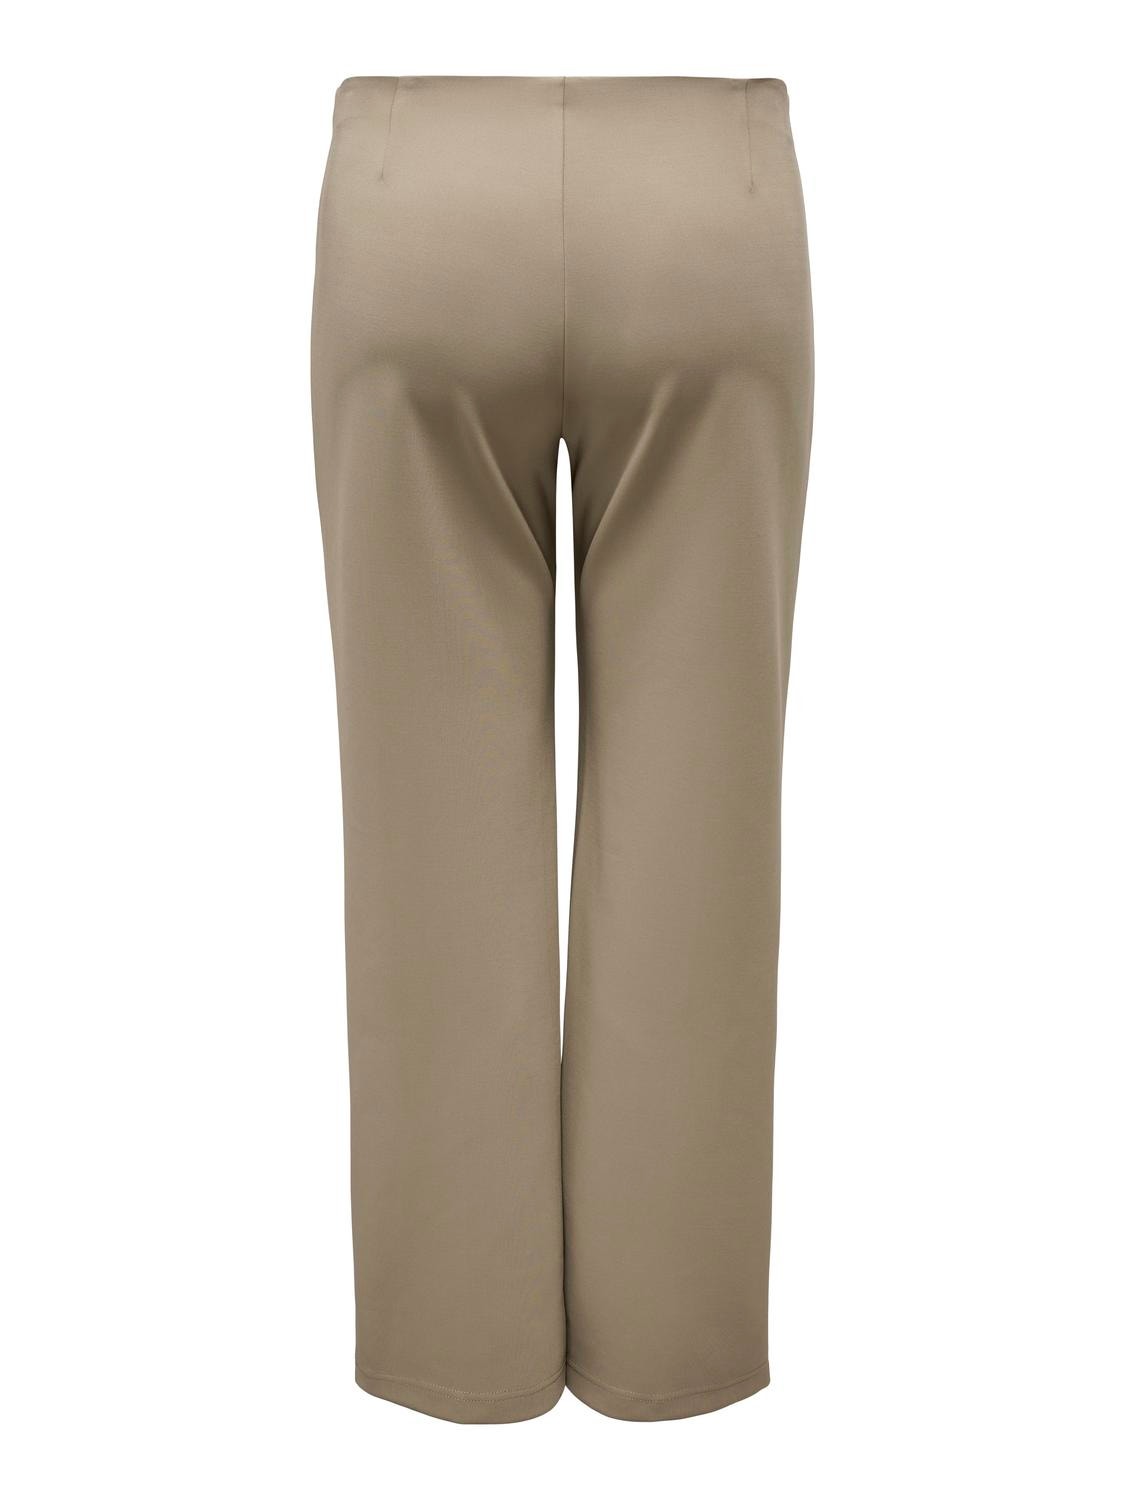 ONLY Curvy trousers with high waist -Weathered Teak - 15312009